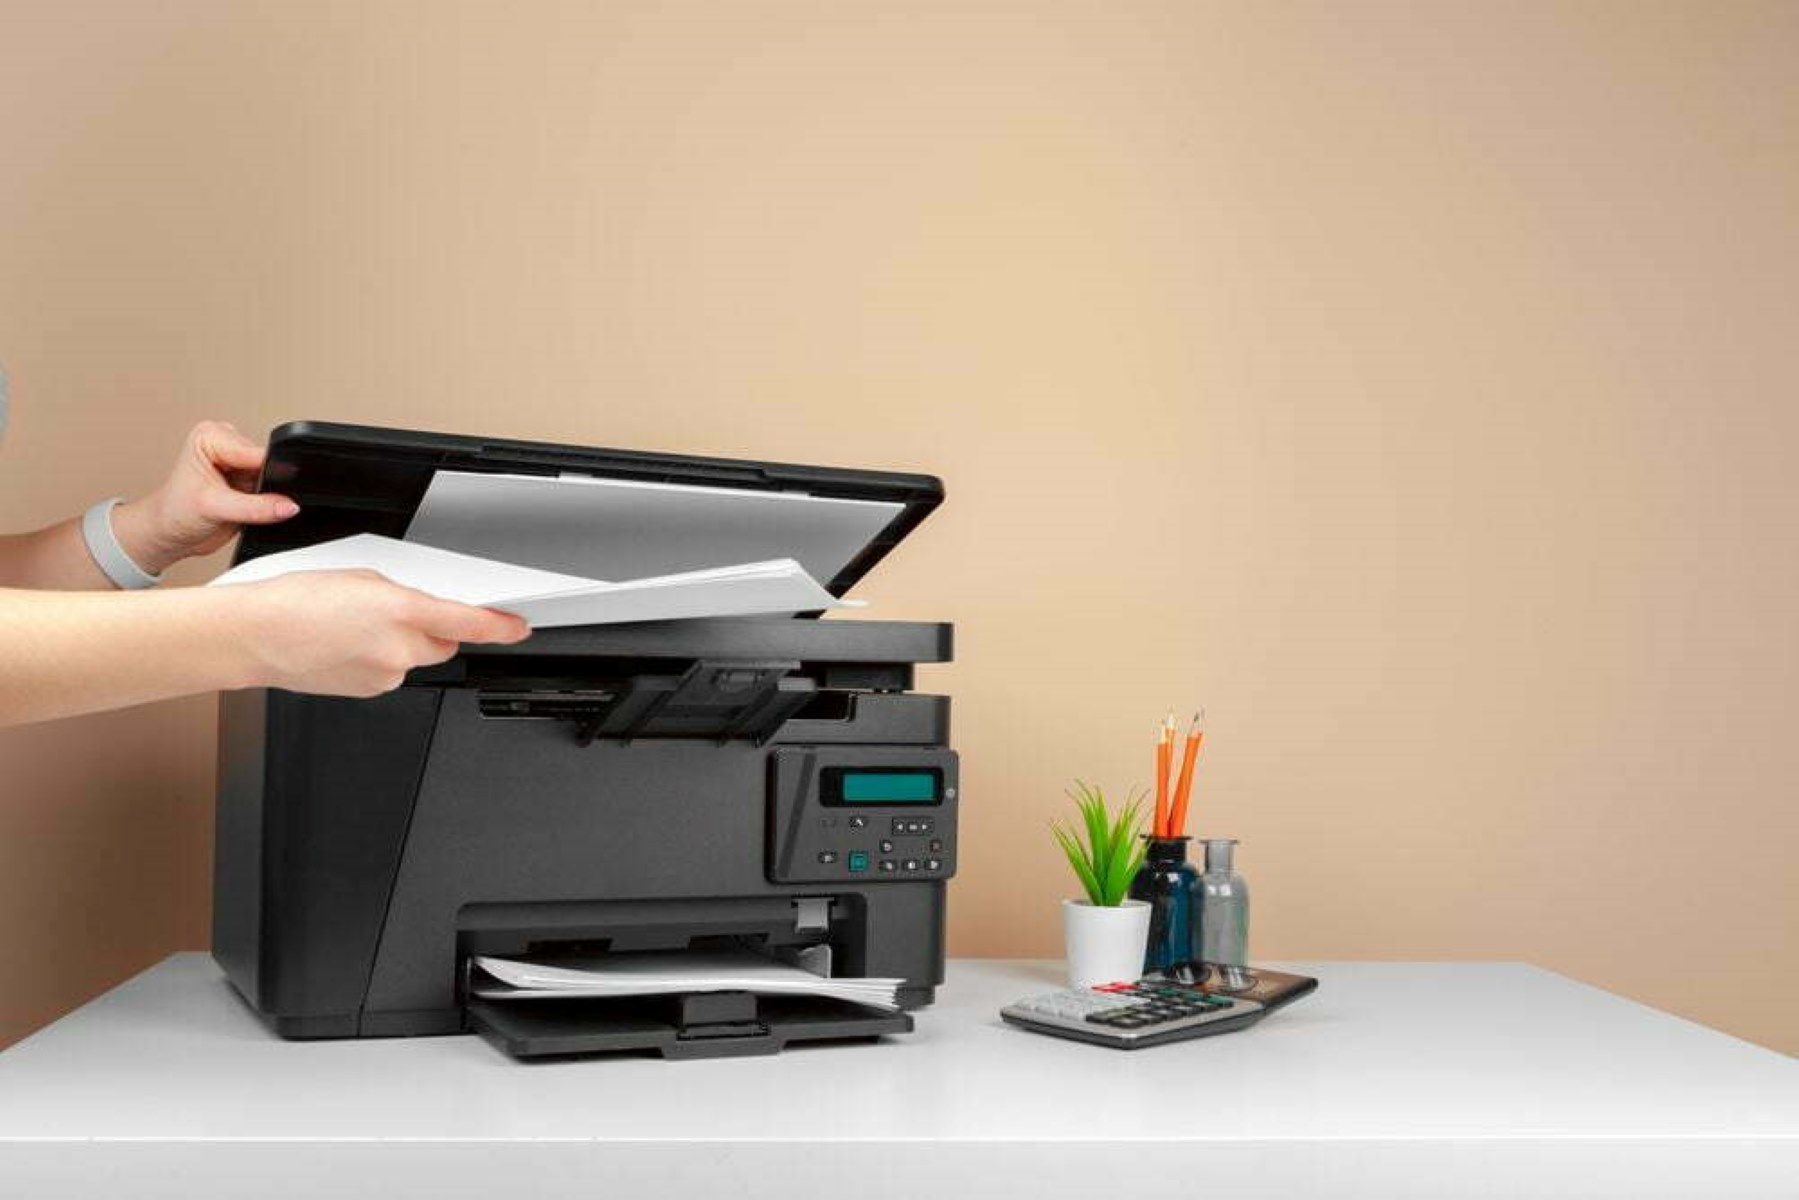 How To Print On Cardstock Canon Printer?, by Guides Arena